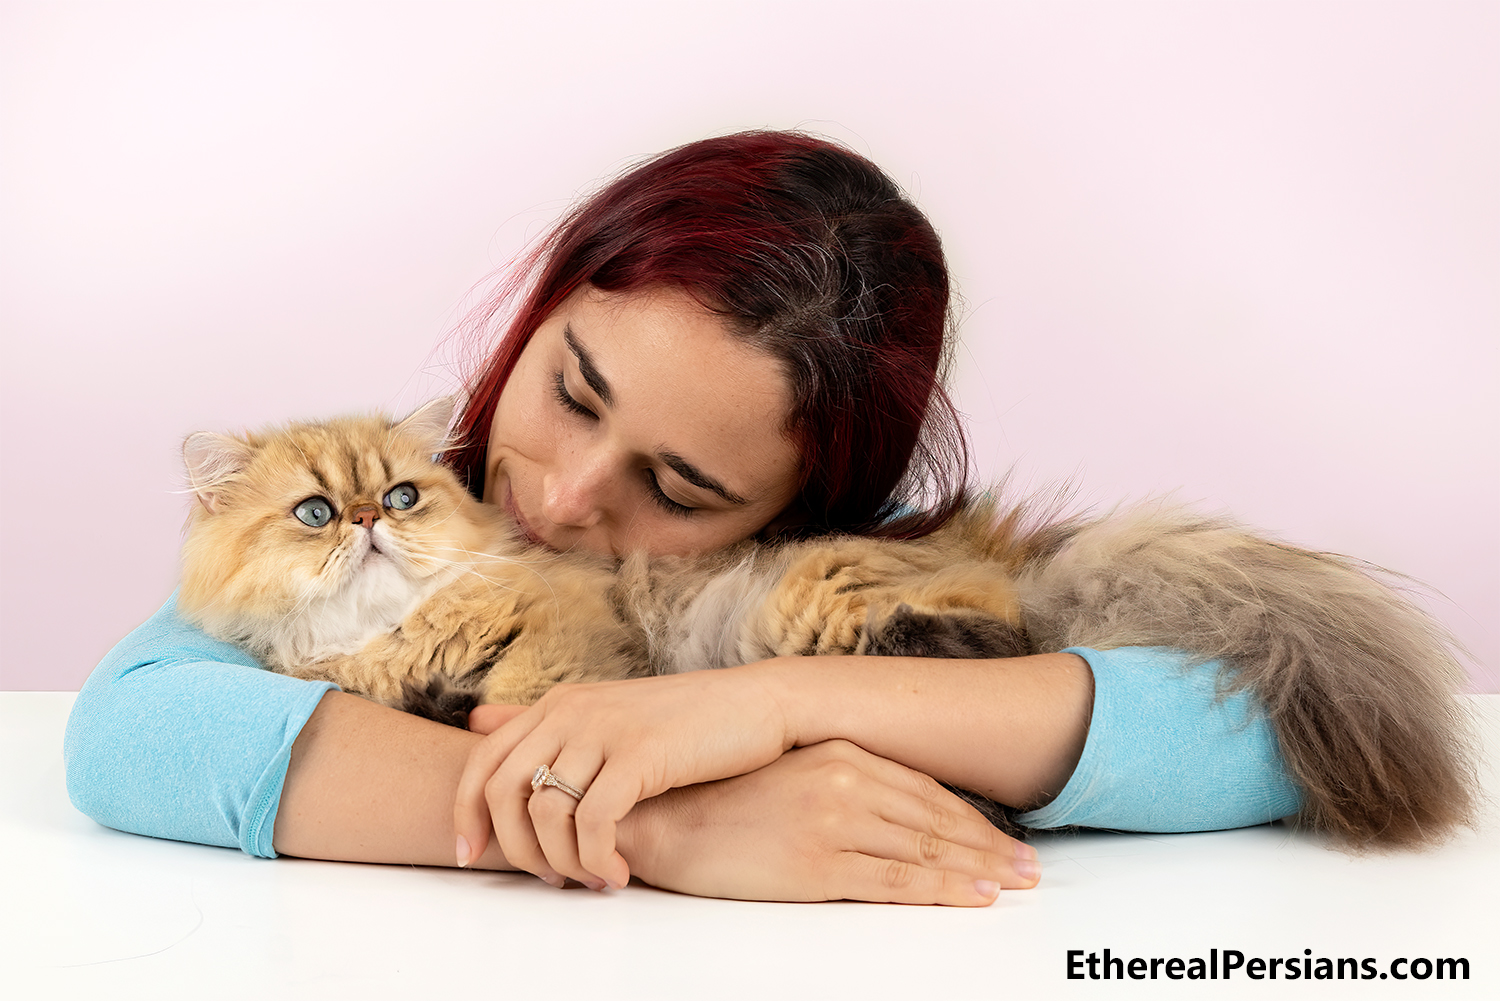 Roxy hugging Farro, a golden persian cat, on a table infront of pink backdrop.